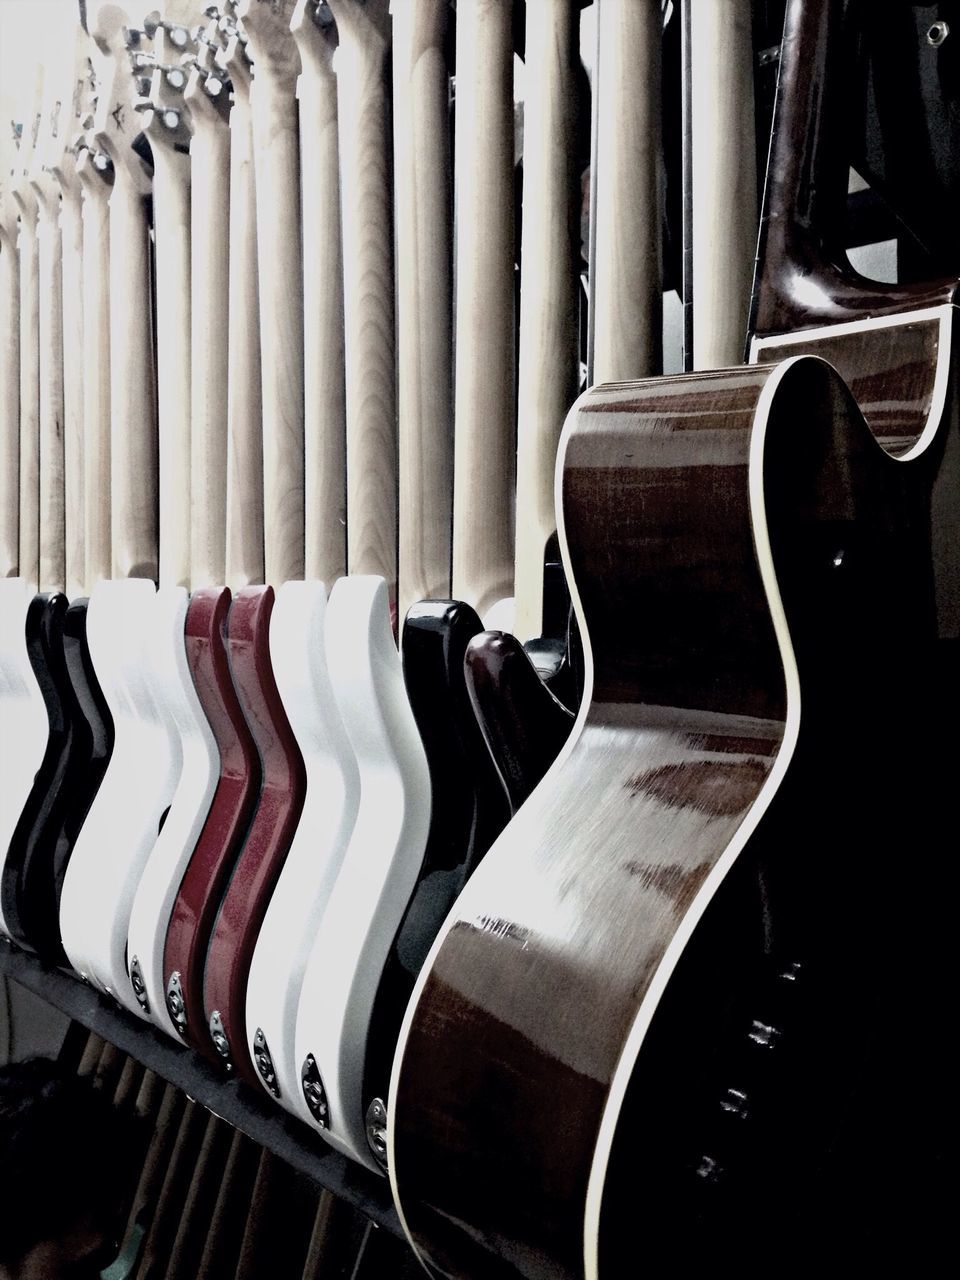 in a row, order, side by side, repetition, metal, still life, close-up, arrangement, indoors, large group of objects, abundance, metallic, no people, music, group of objects, musical instrument, industry, day, arranged, stack